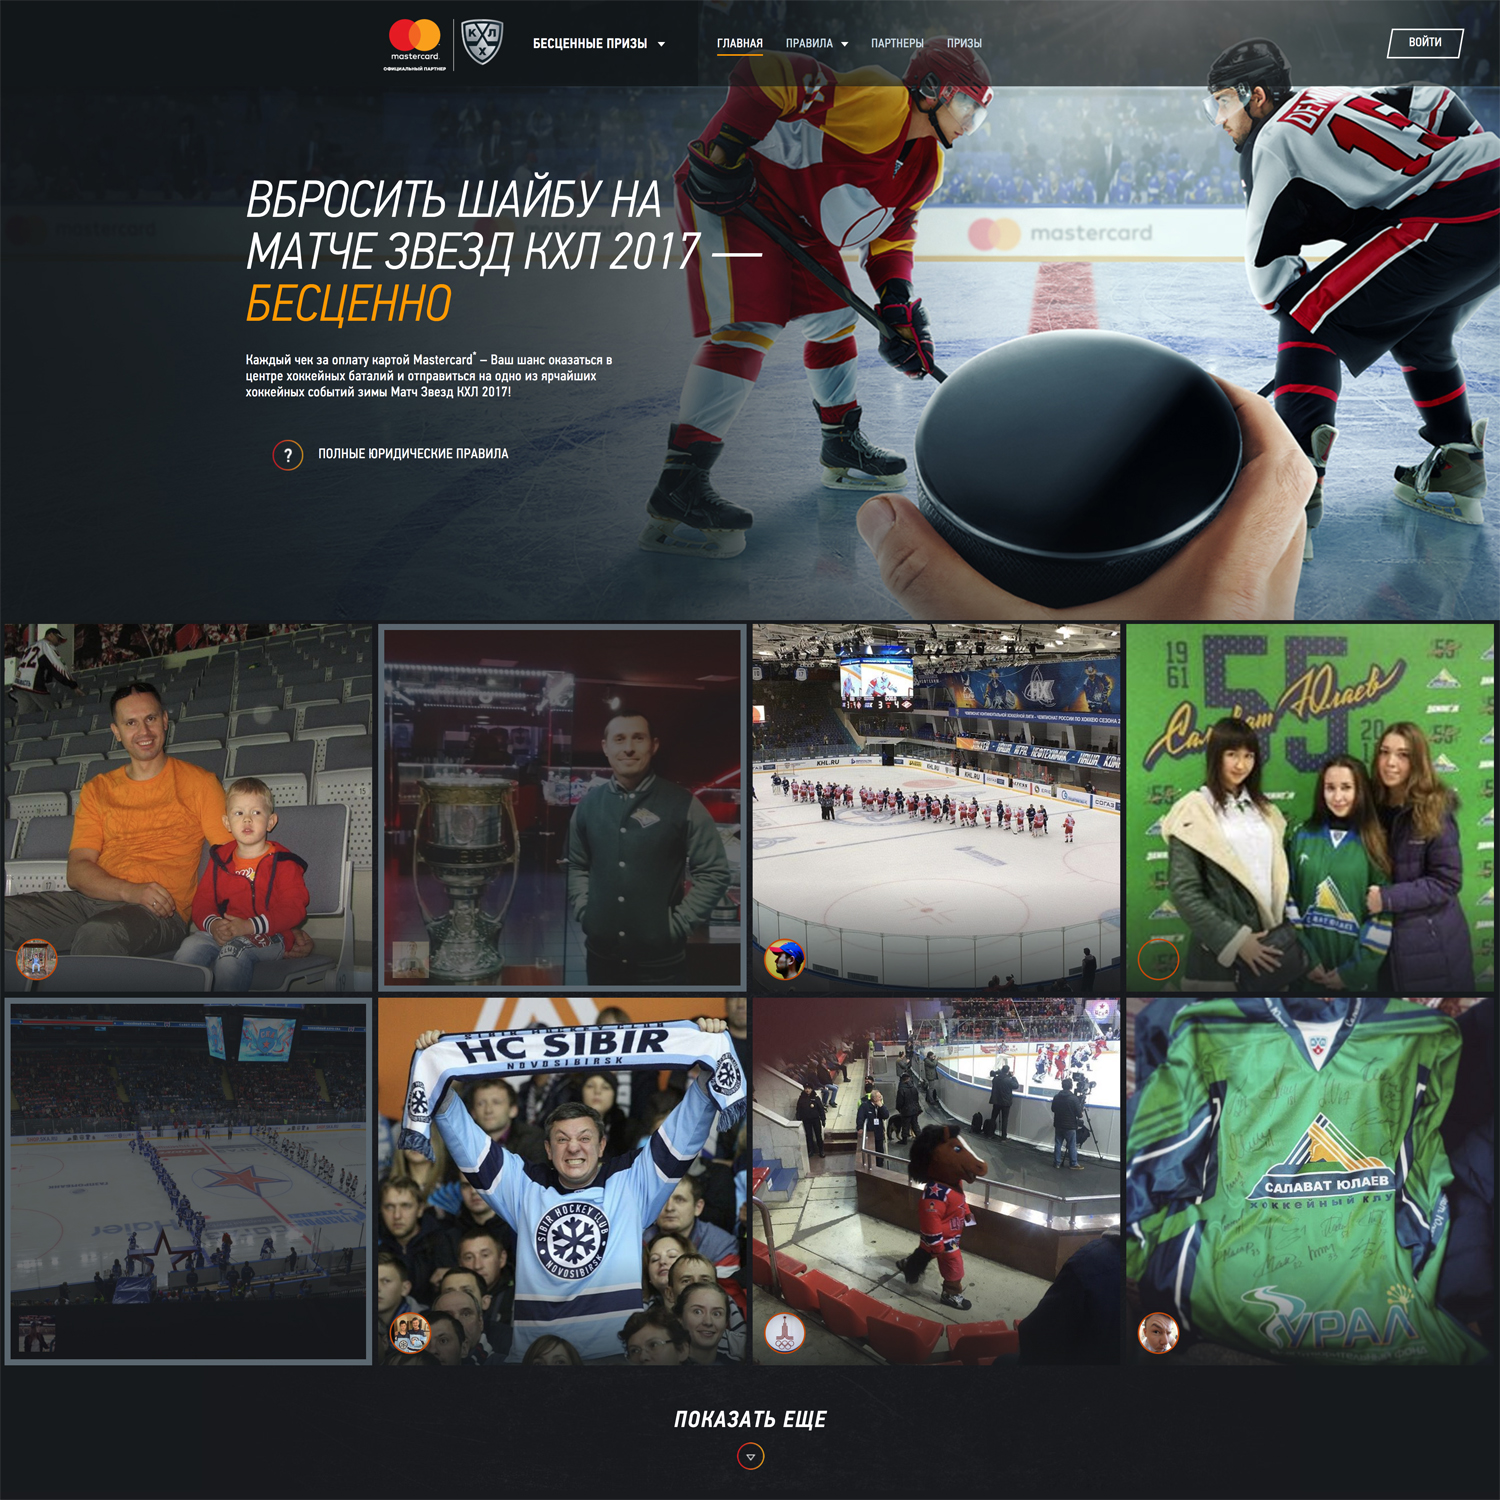 Sport values and dynamic were shared through this sport social wall, to promote this professionnal hockey competition.